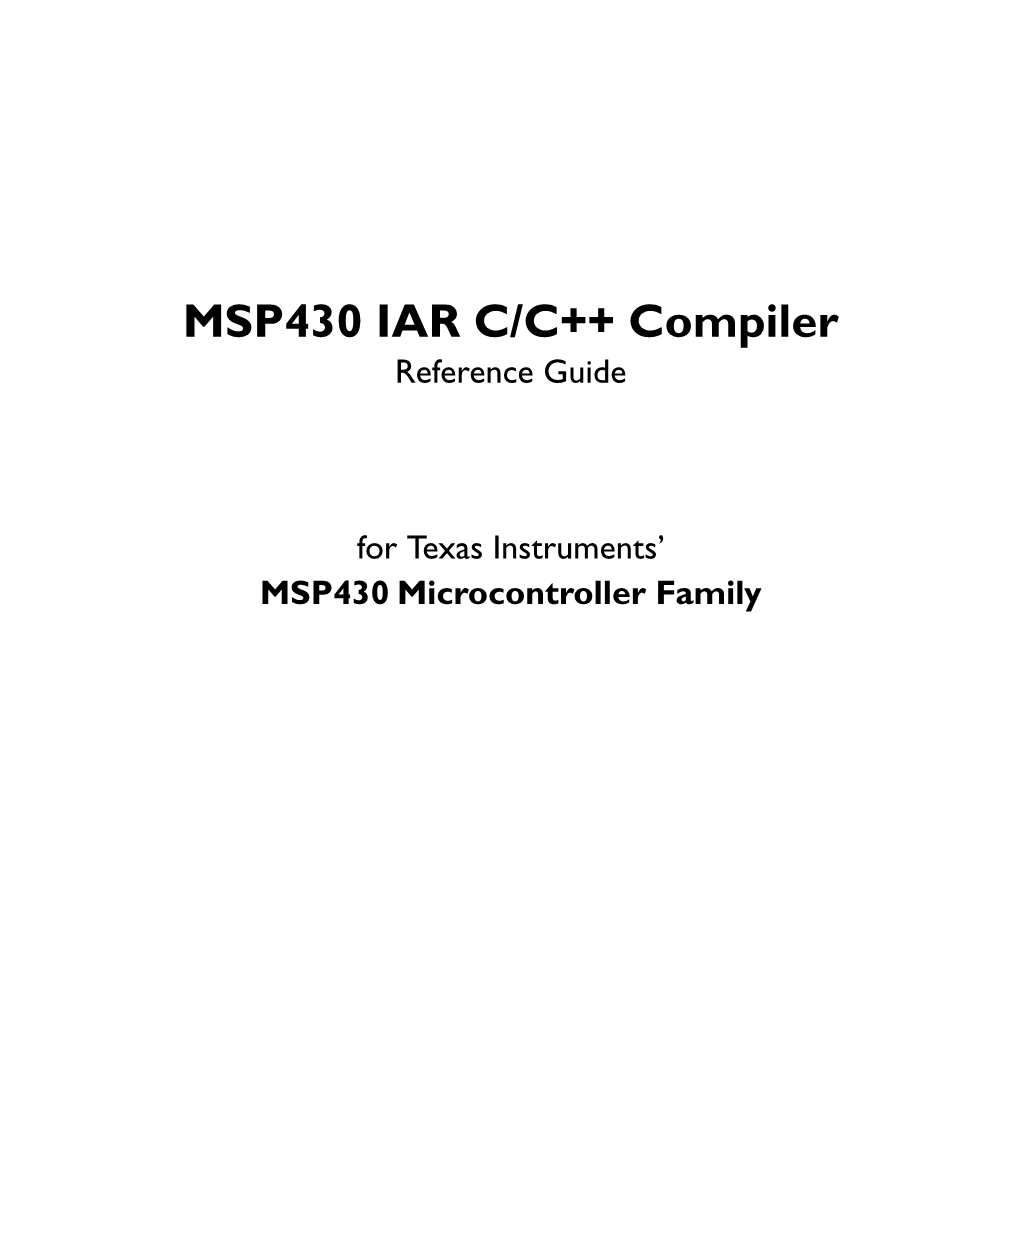 MSP430 IAR C/C++ Compiler Reference Guide